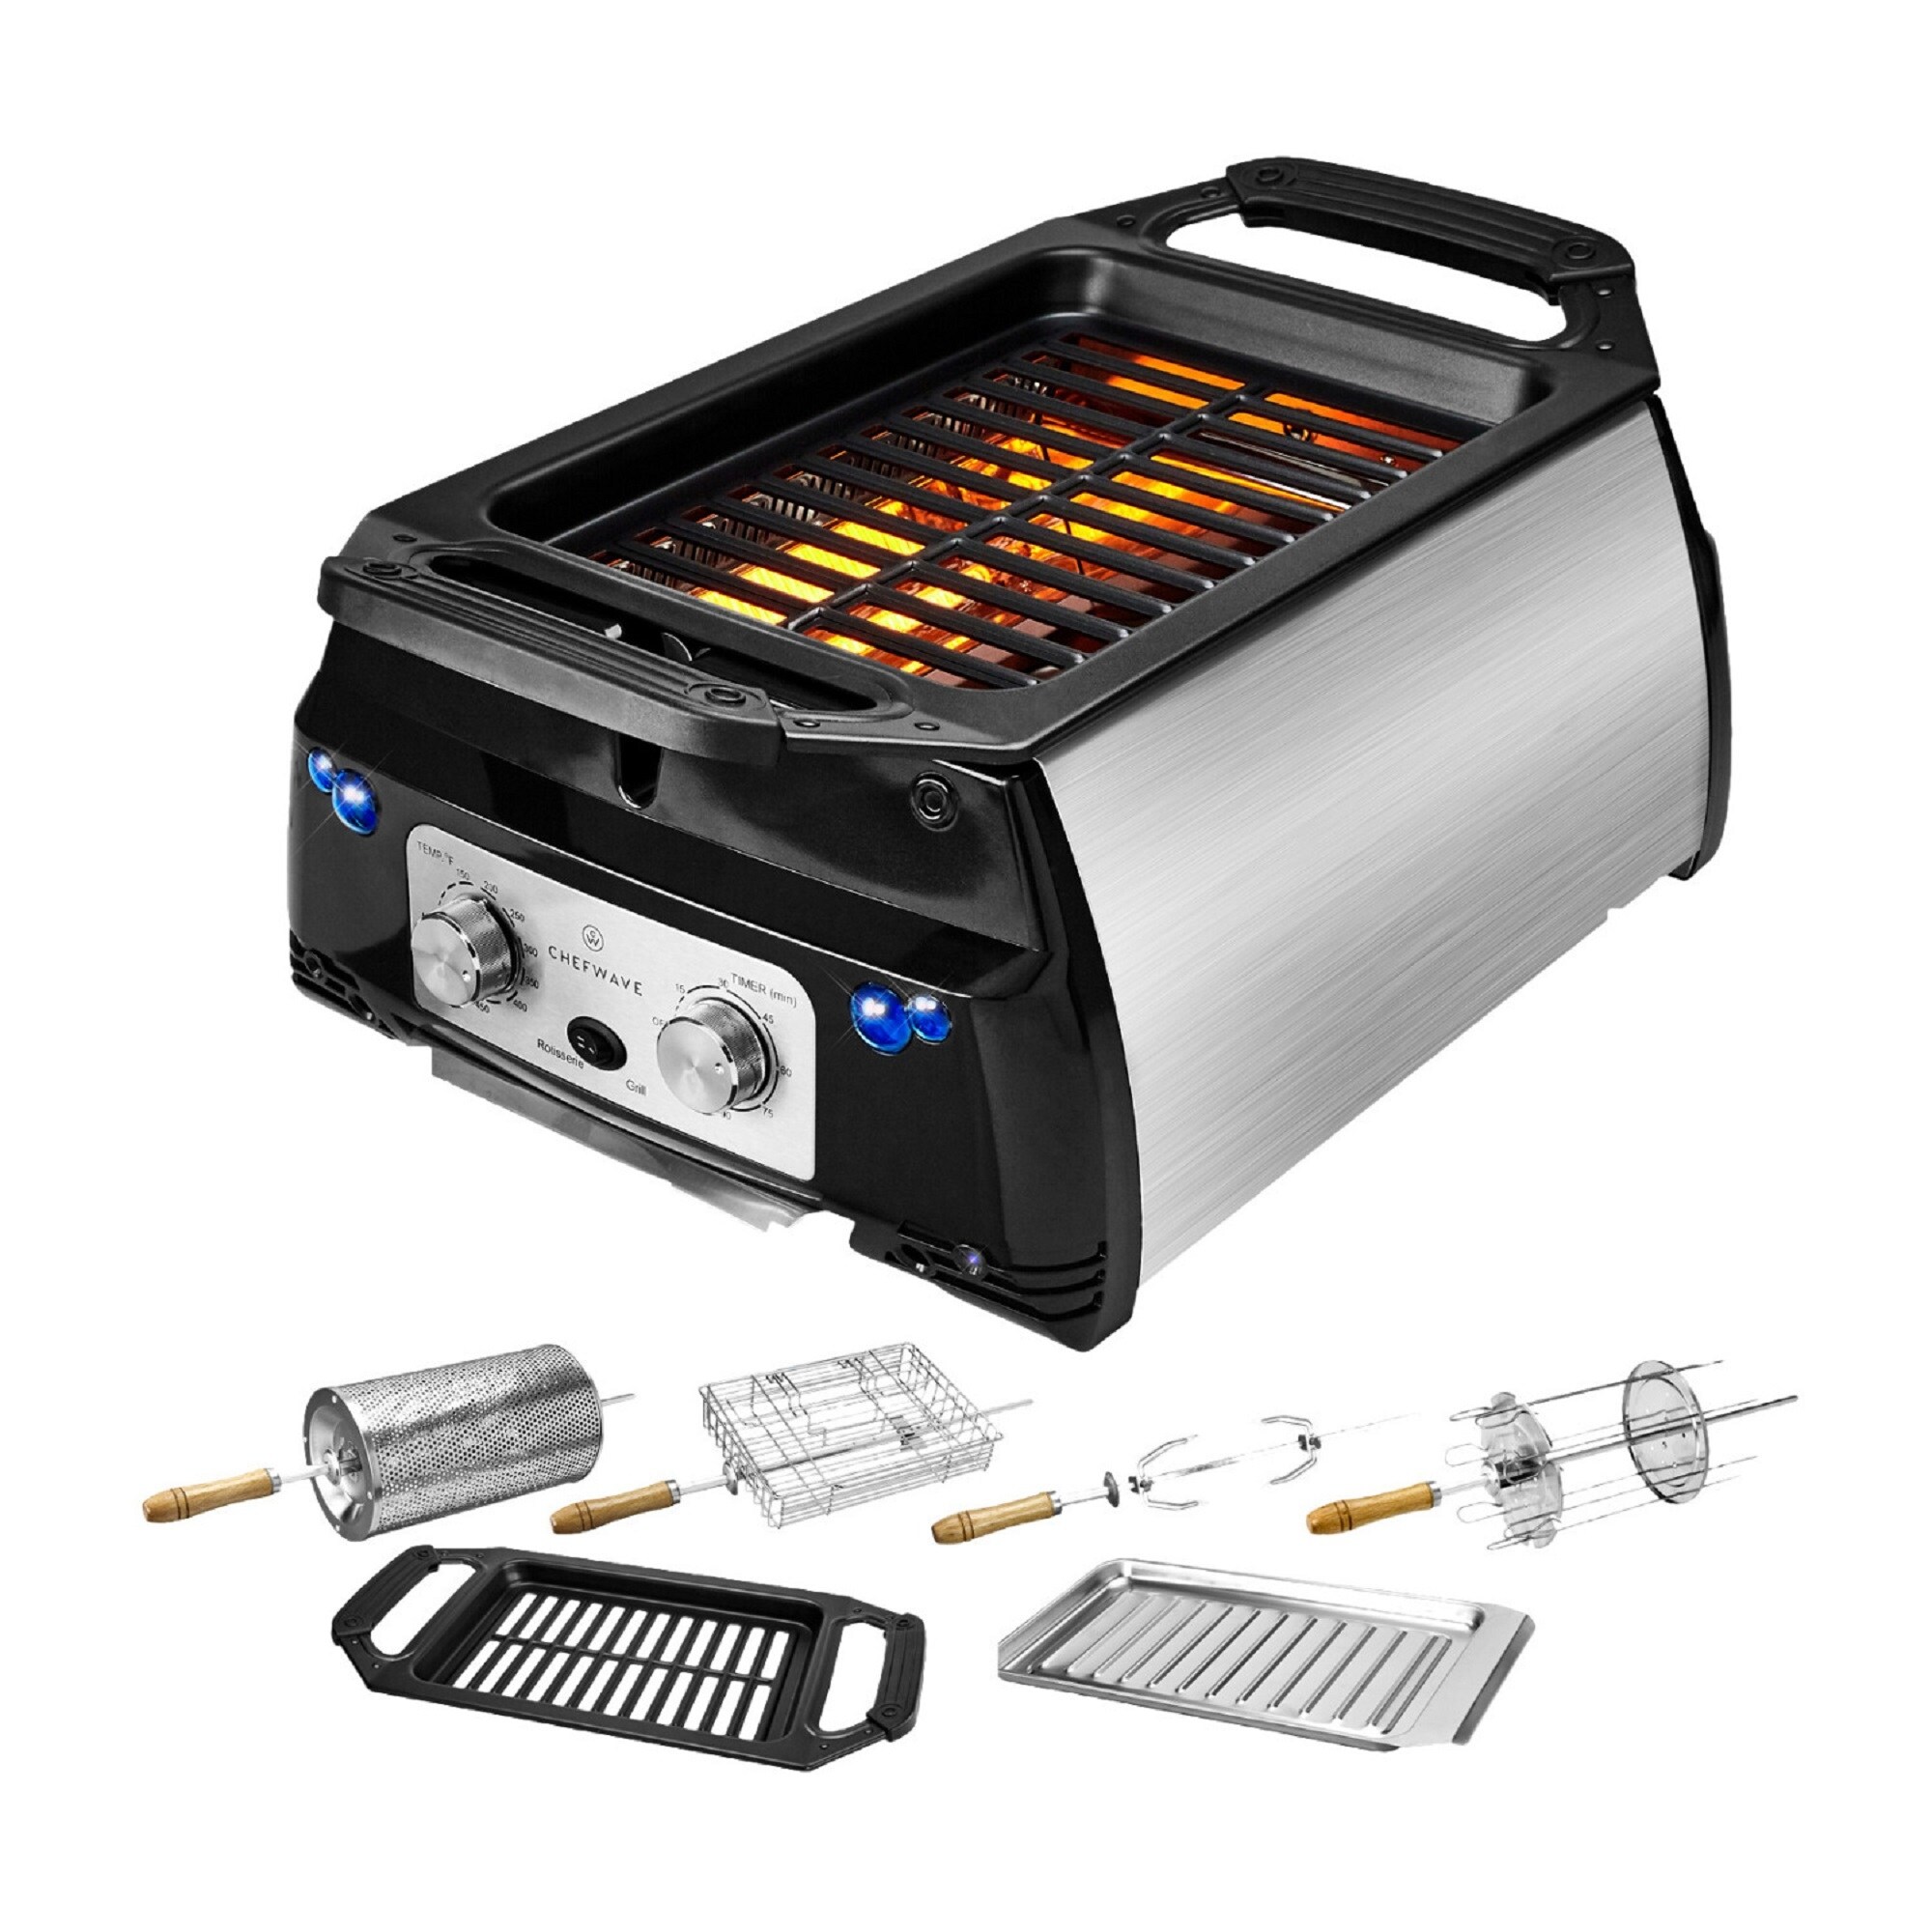 https://ak1.ostkcdn.com/images/products/is/images/direct/15bd5c23b6a3b94dbb720b447be3580847913fb5/ChefWave-Sosaku-Smokeless-Infrared-Rotisserie-Indoor-Tabletop-Grill.jpg